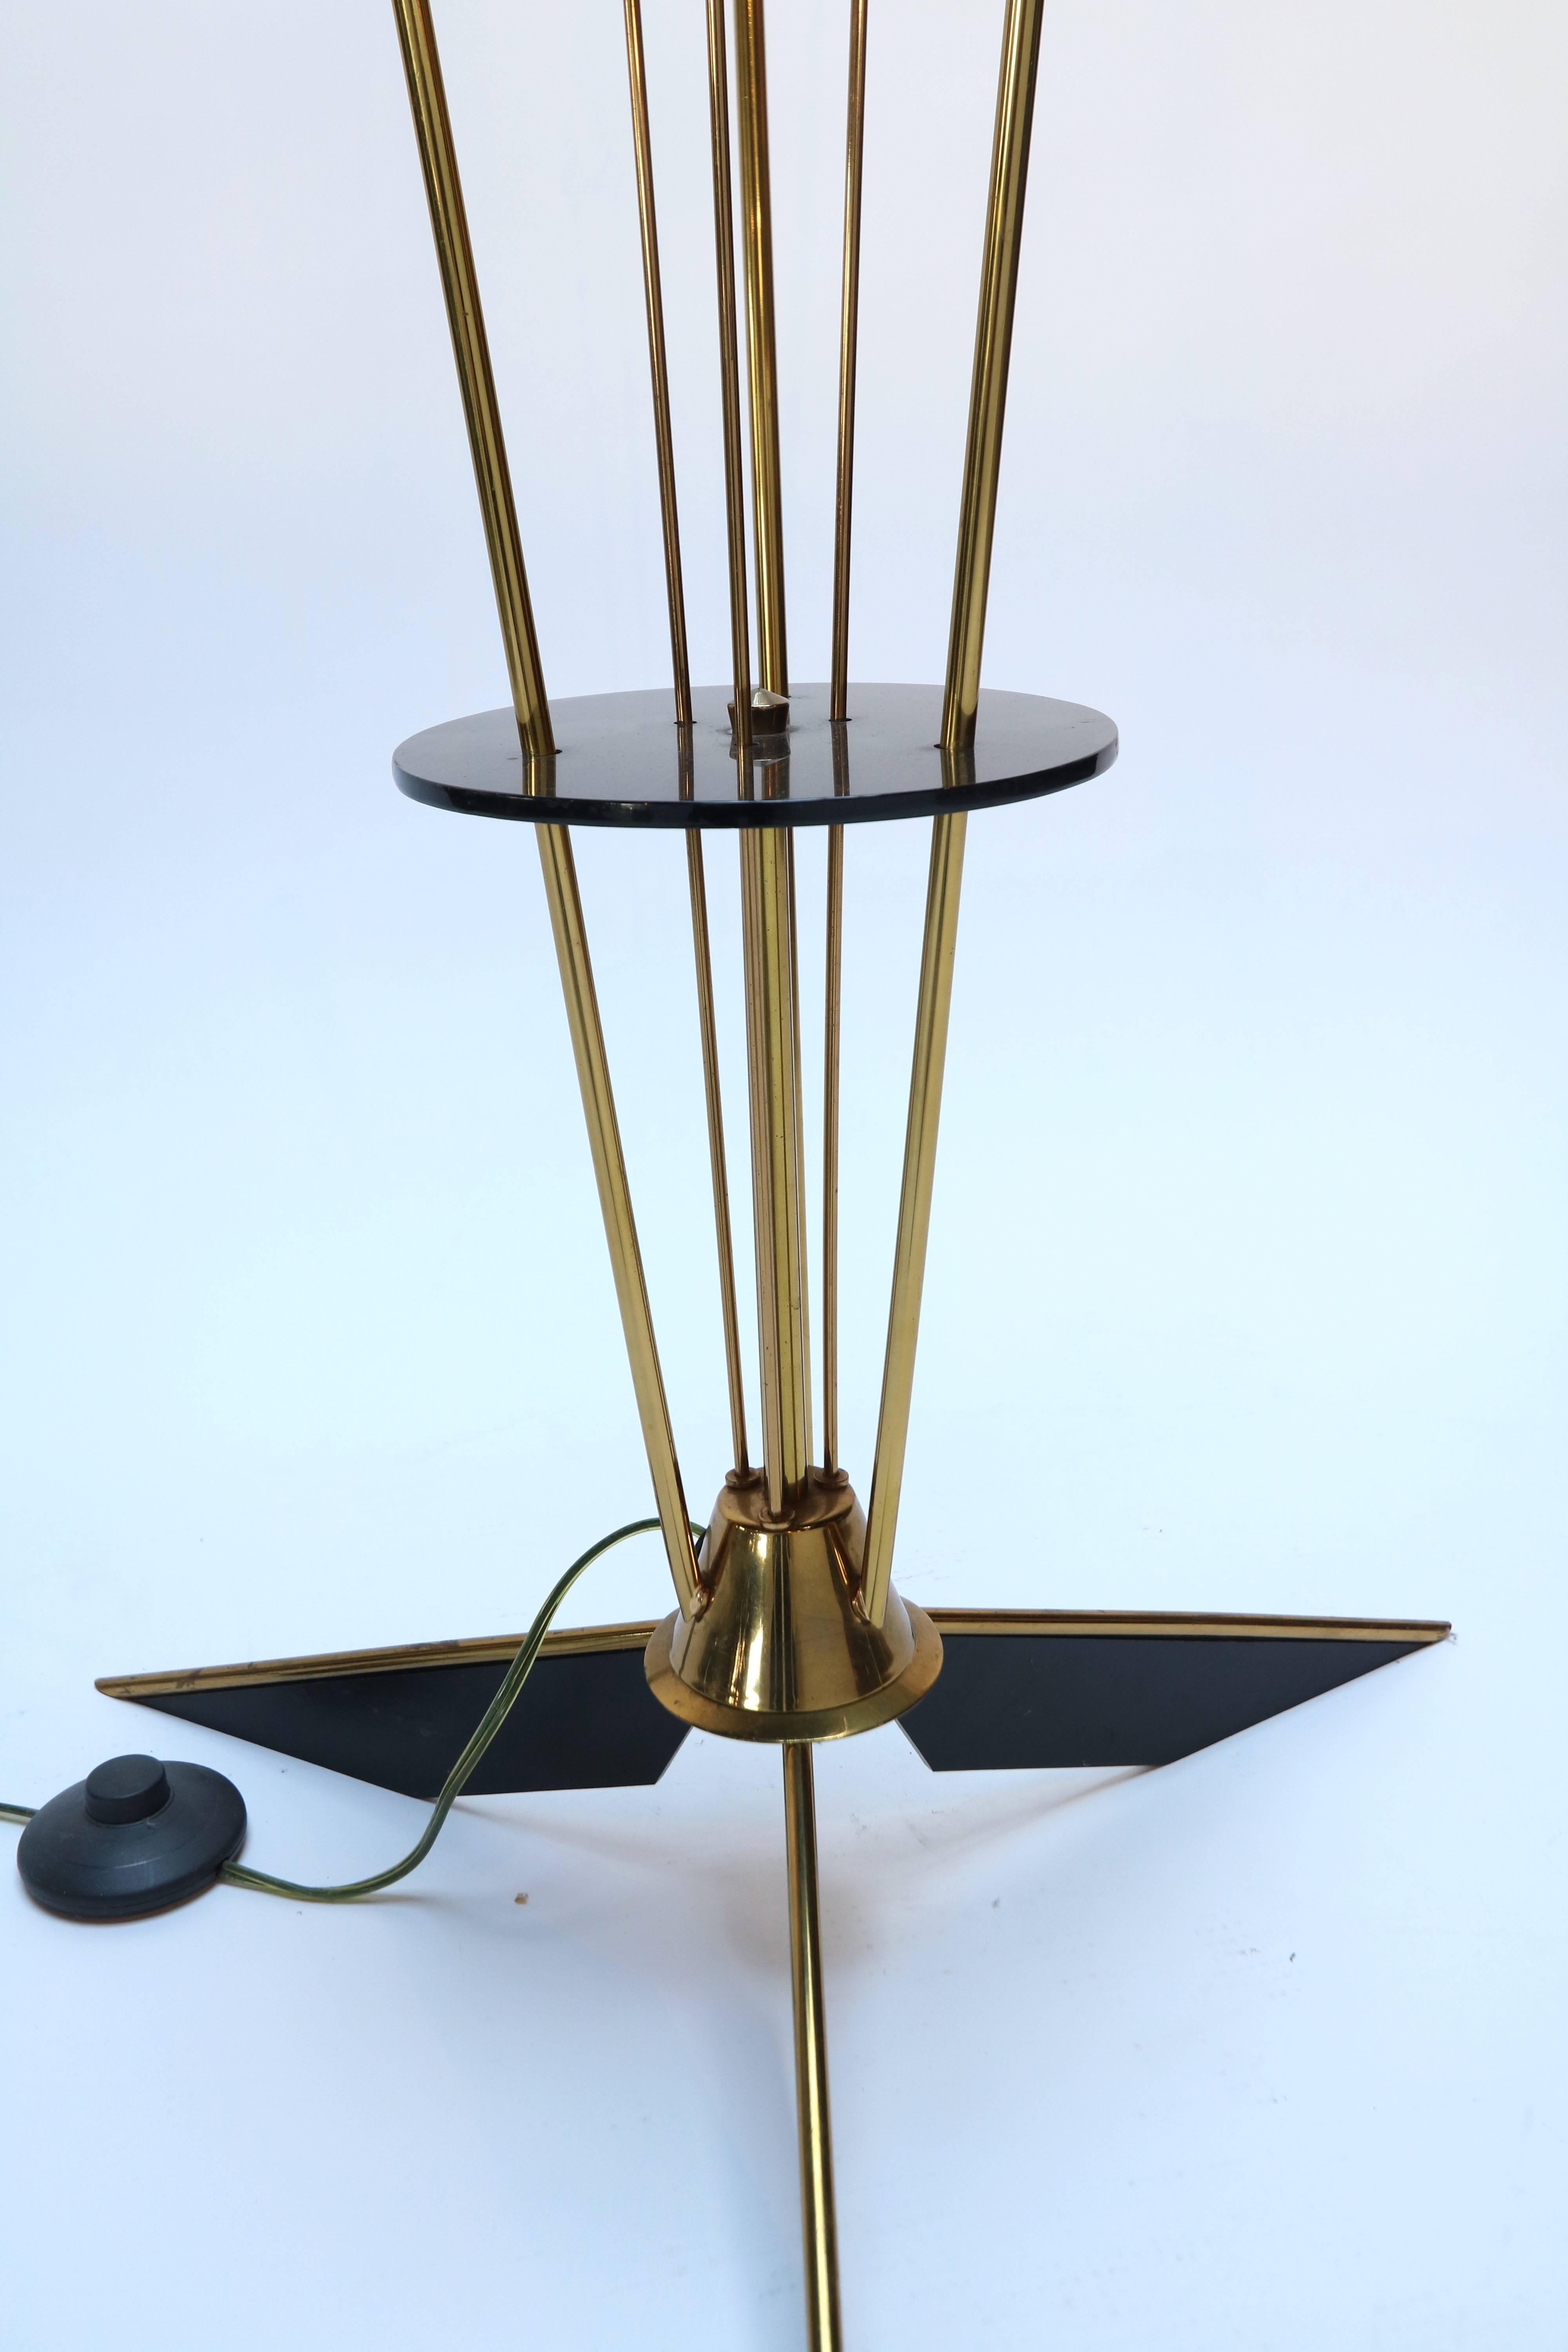 Mid-20th Century French Brass and Black Metal Floor Lamp with 3 Opaque White Glass Lights, 1950s For Sale